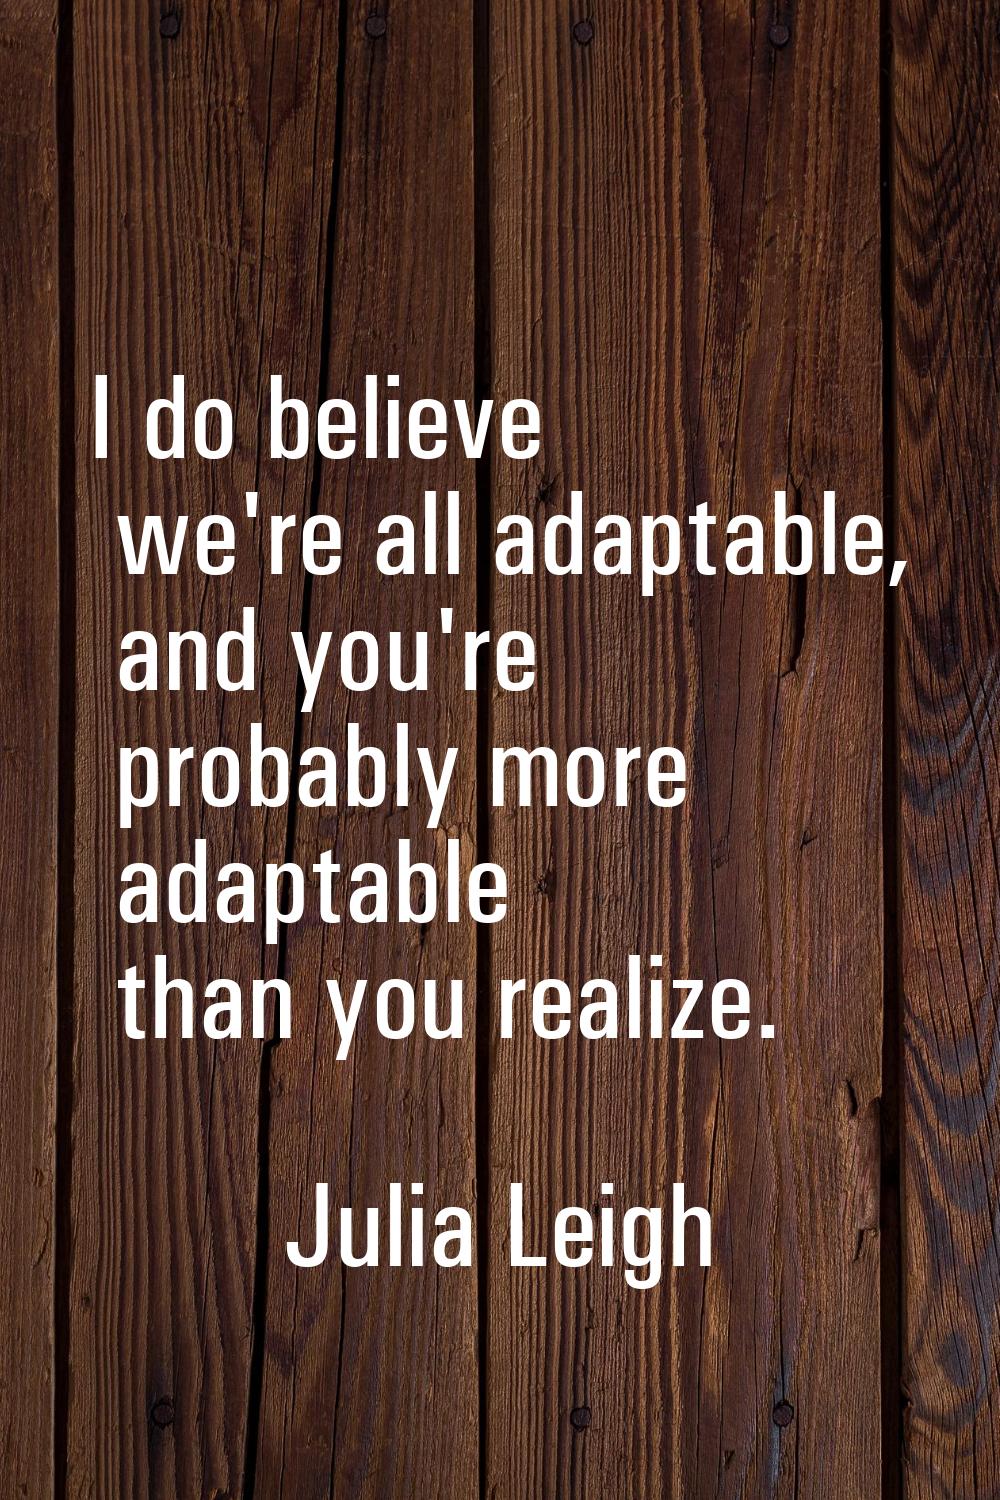 I do believe we're all adaptable, and you're probably more adaptable than you realize.